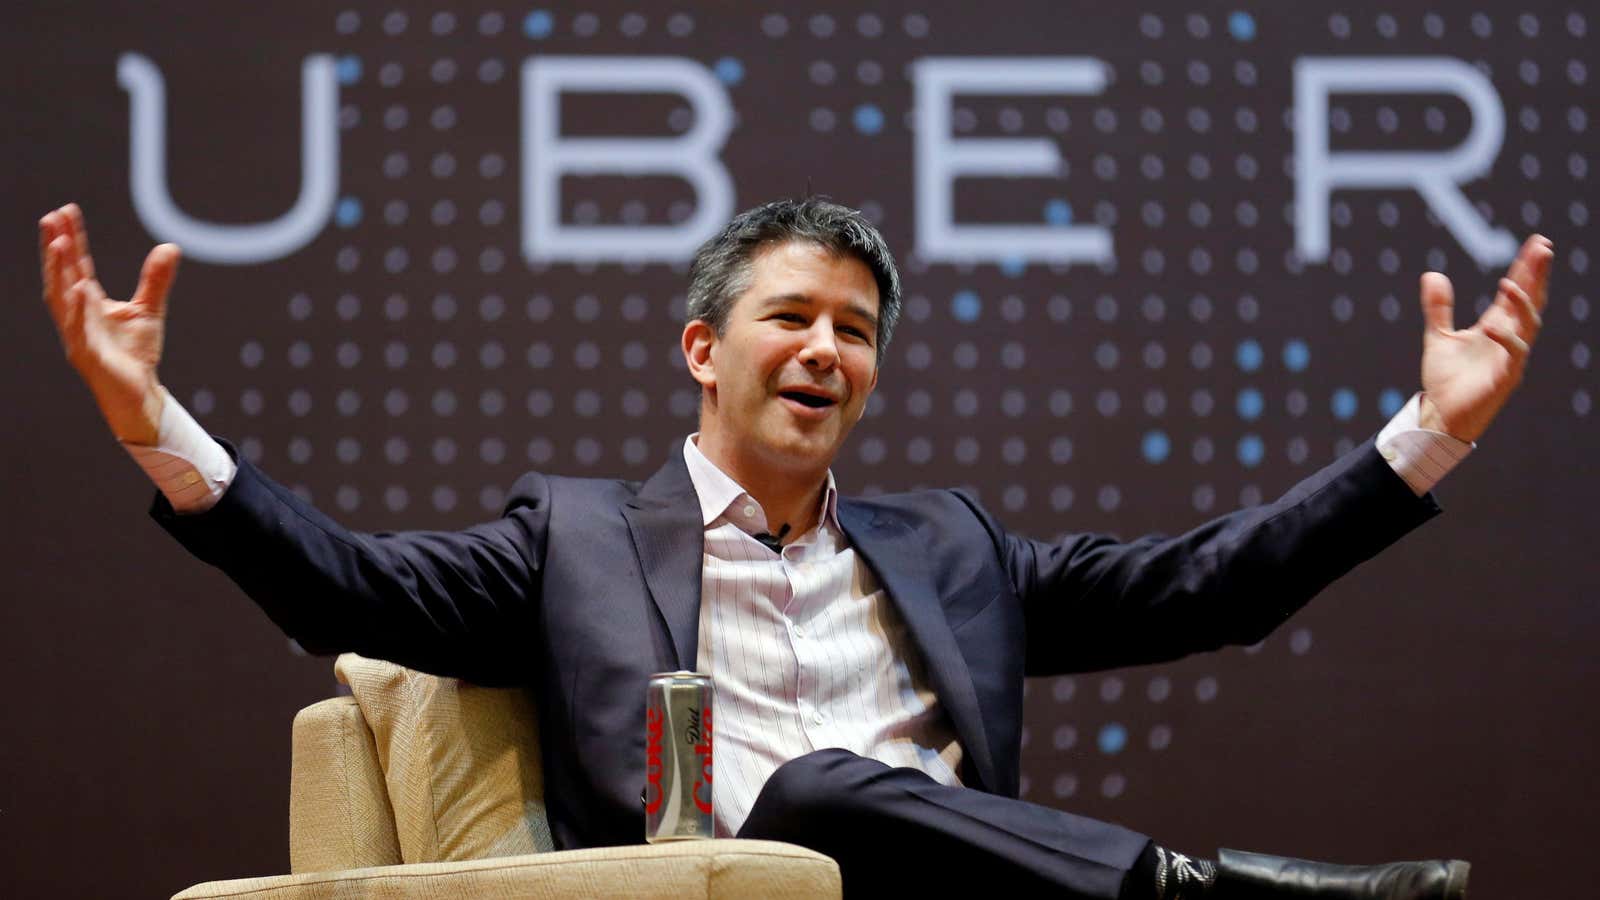 Uber has long prided itself on ignoring the status quo and rewriting the rules.